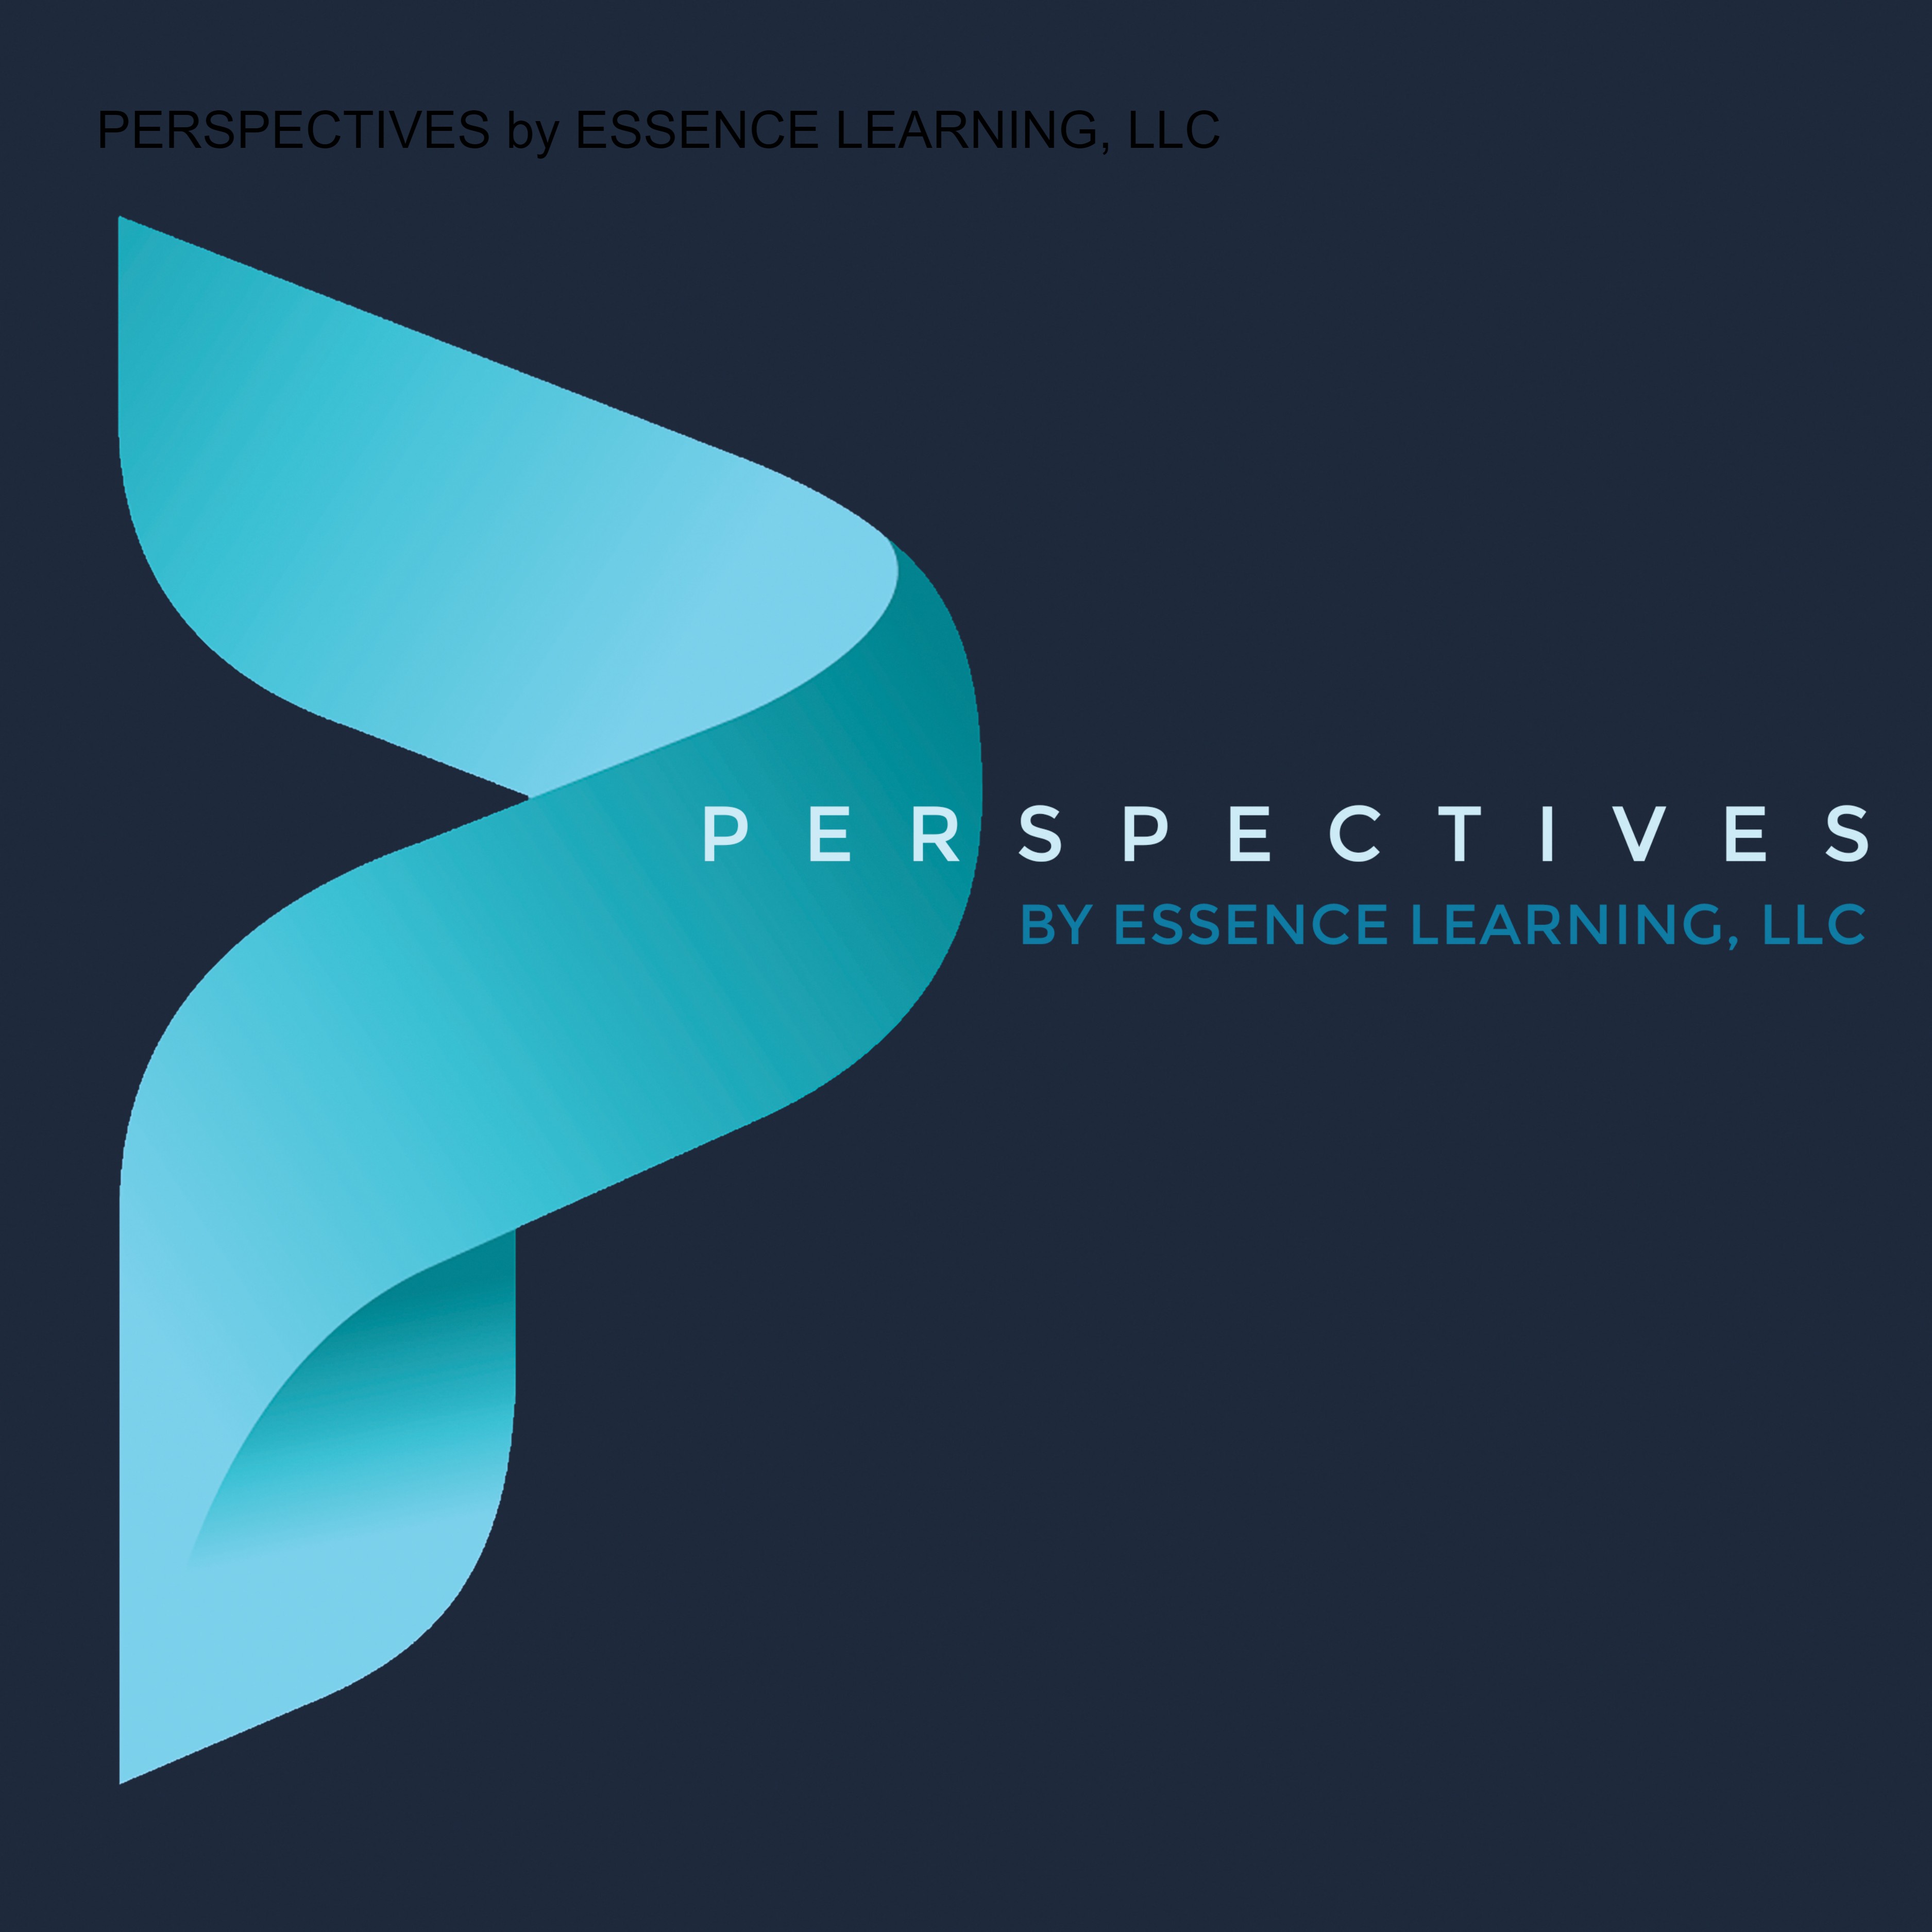 PERSPECTIVES by ESSENCE LEARNING, LLC